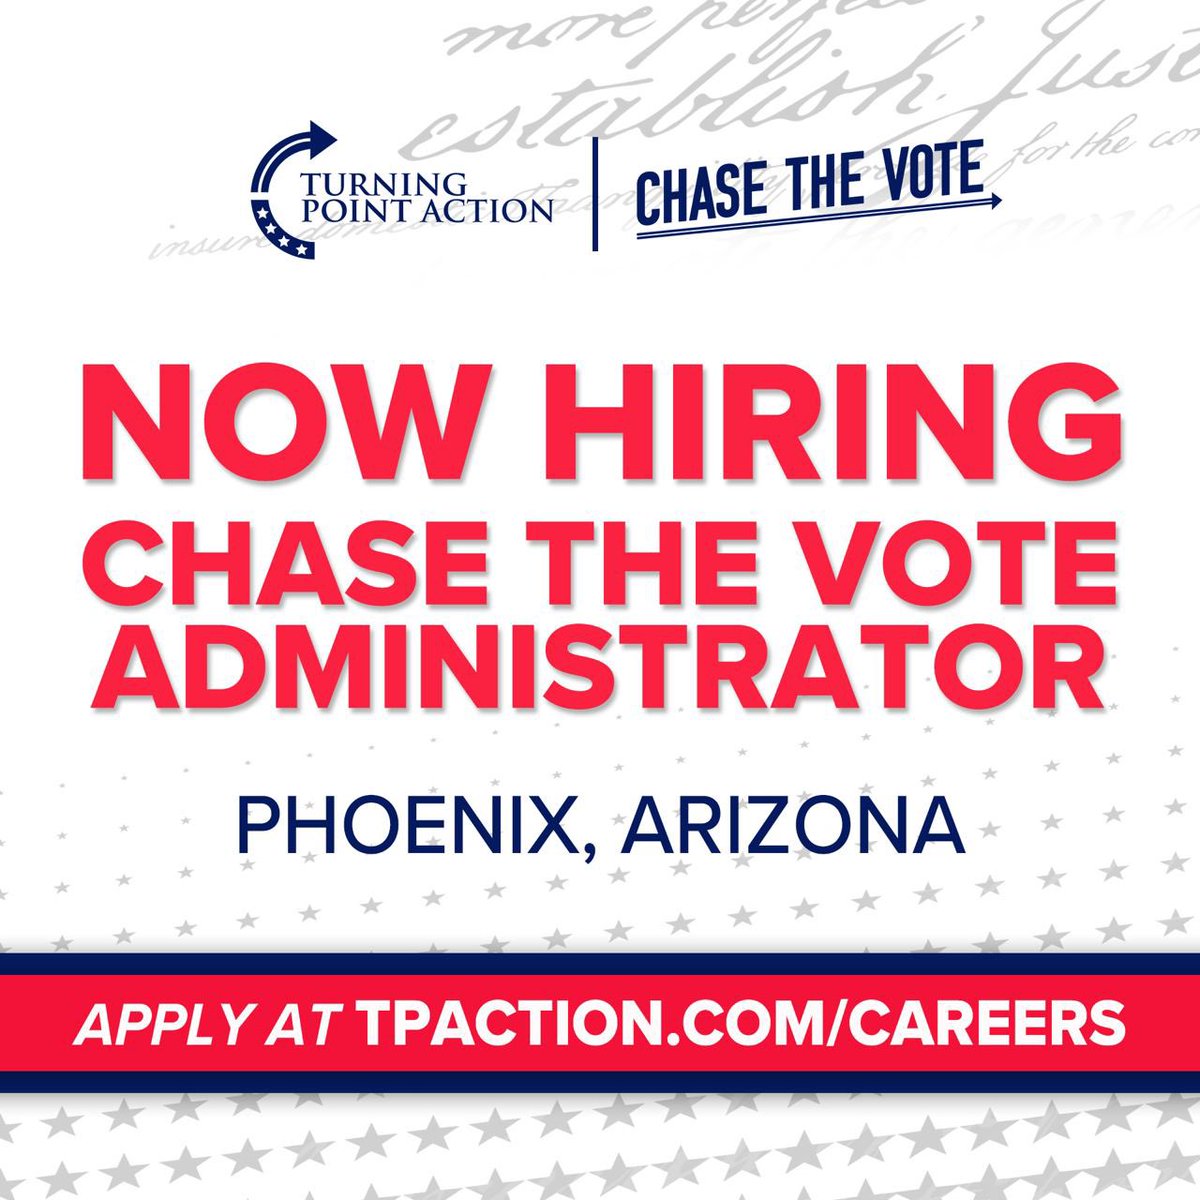 We are hiring at our office to help with our Chase the Vote initiative at our HQ in Arizona! We also have jobs in YOUR NEIGHBORHOOD to help Turn Out the Vote for Trump this year. If you need a job, come work with us! TPAction.com/Careers